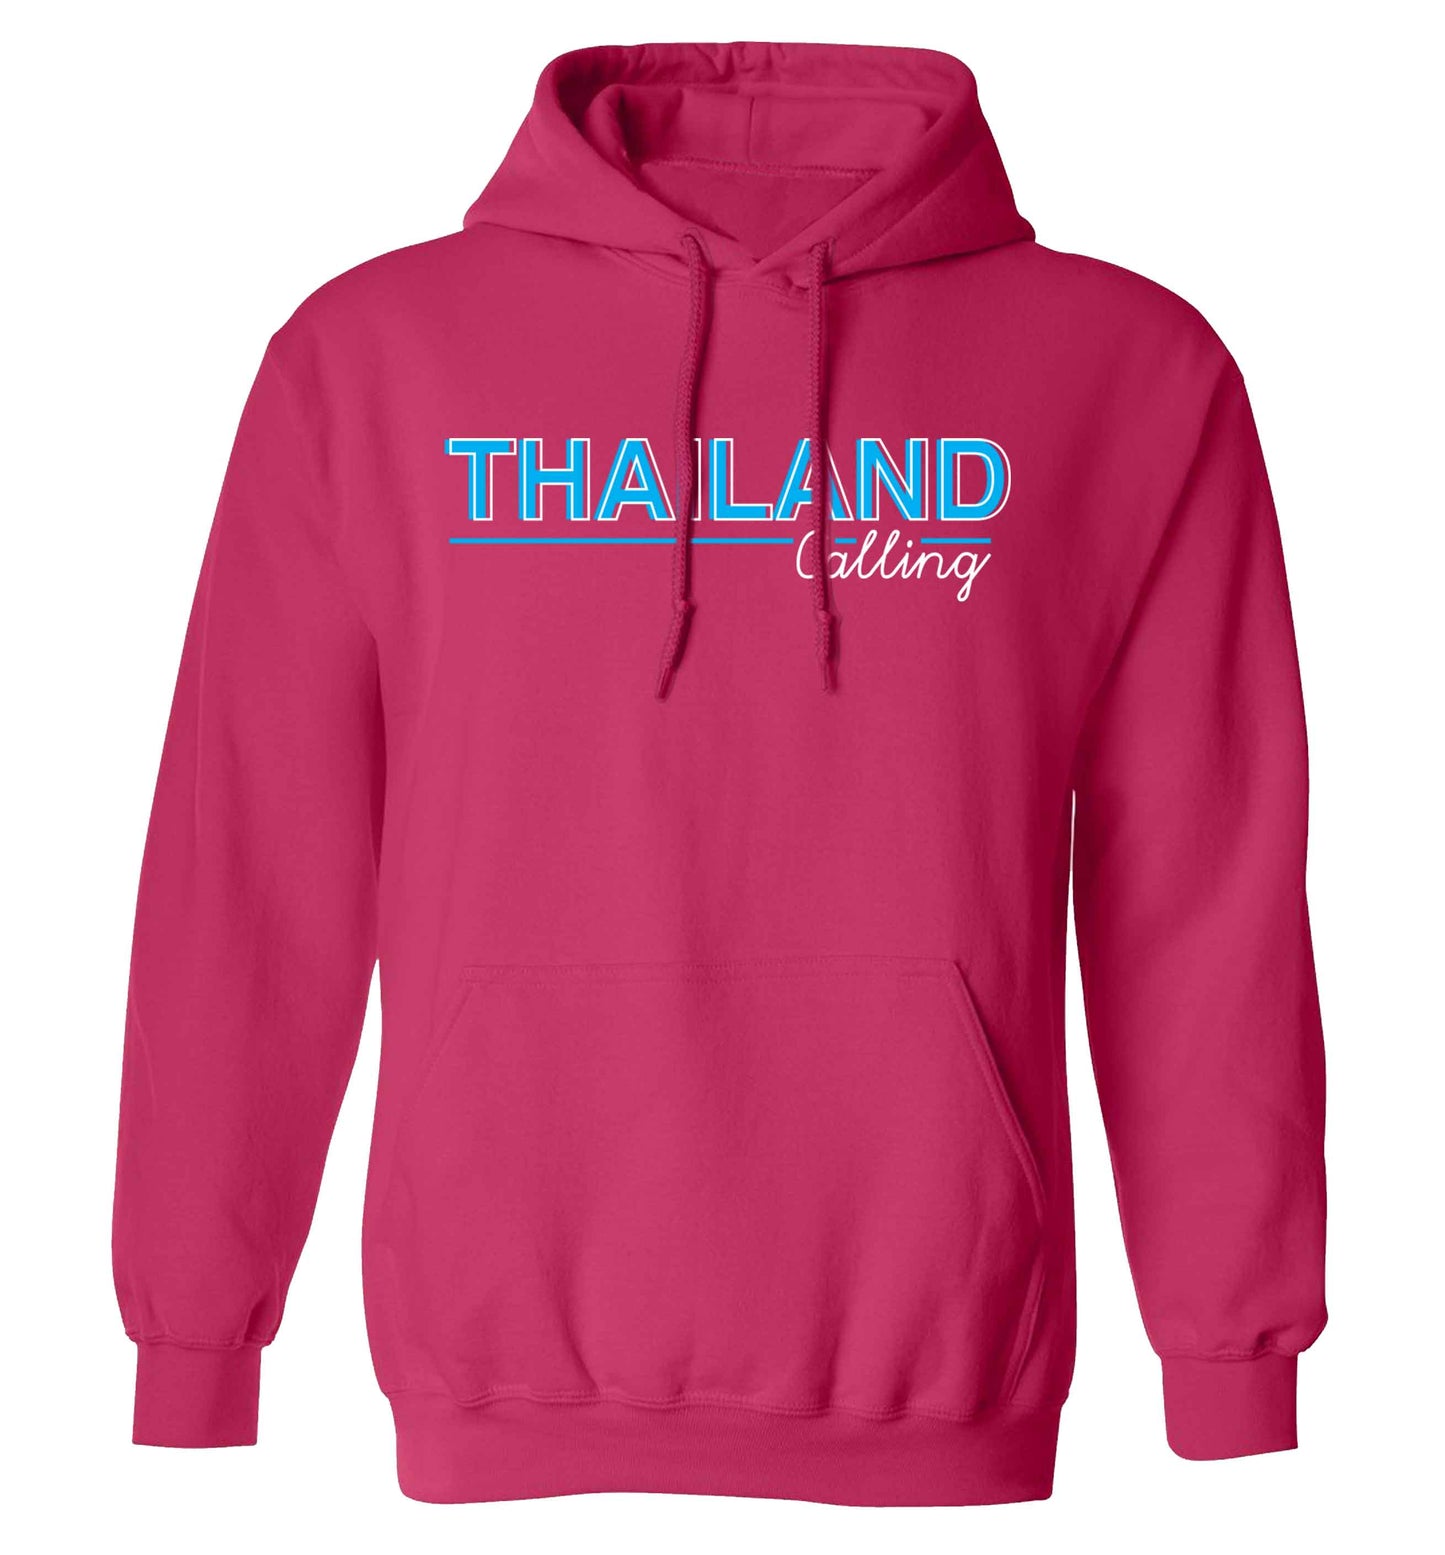 Thailand calling adults unisex pink hoodie 2XL